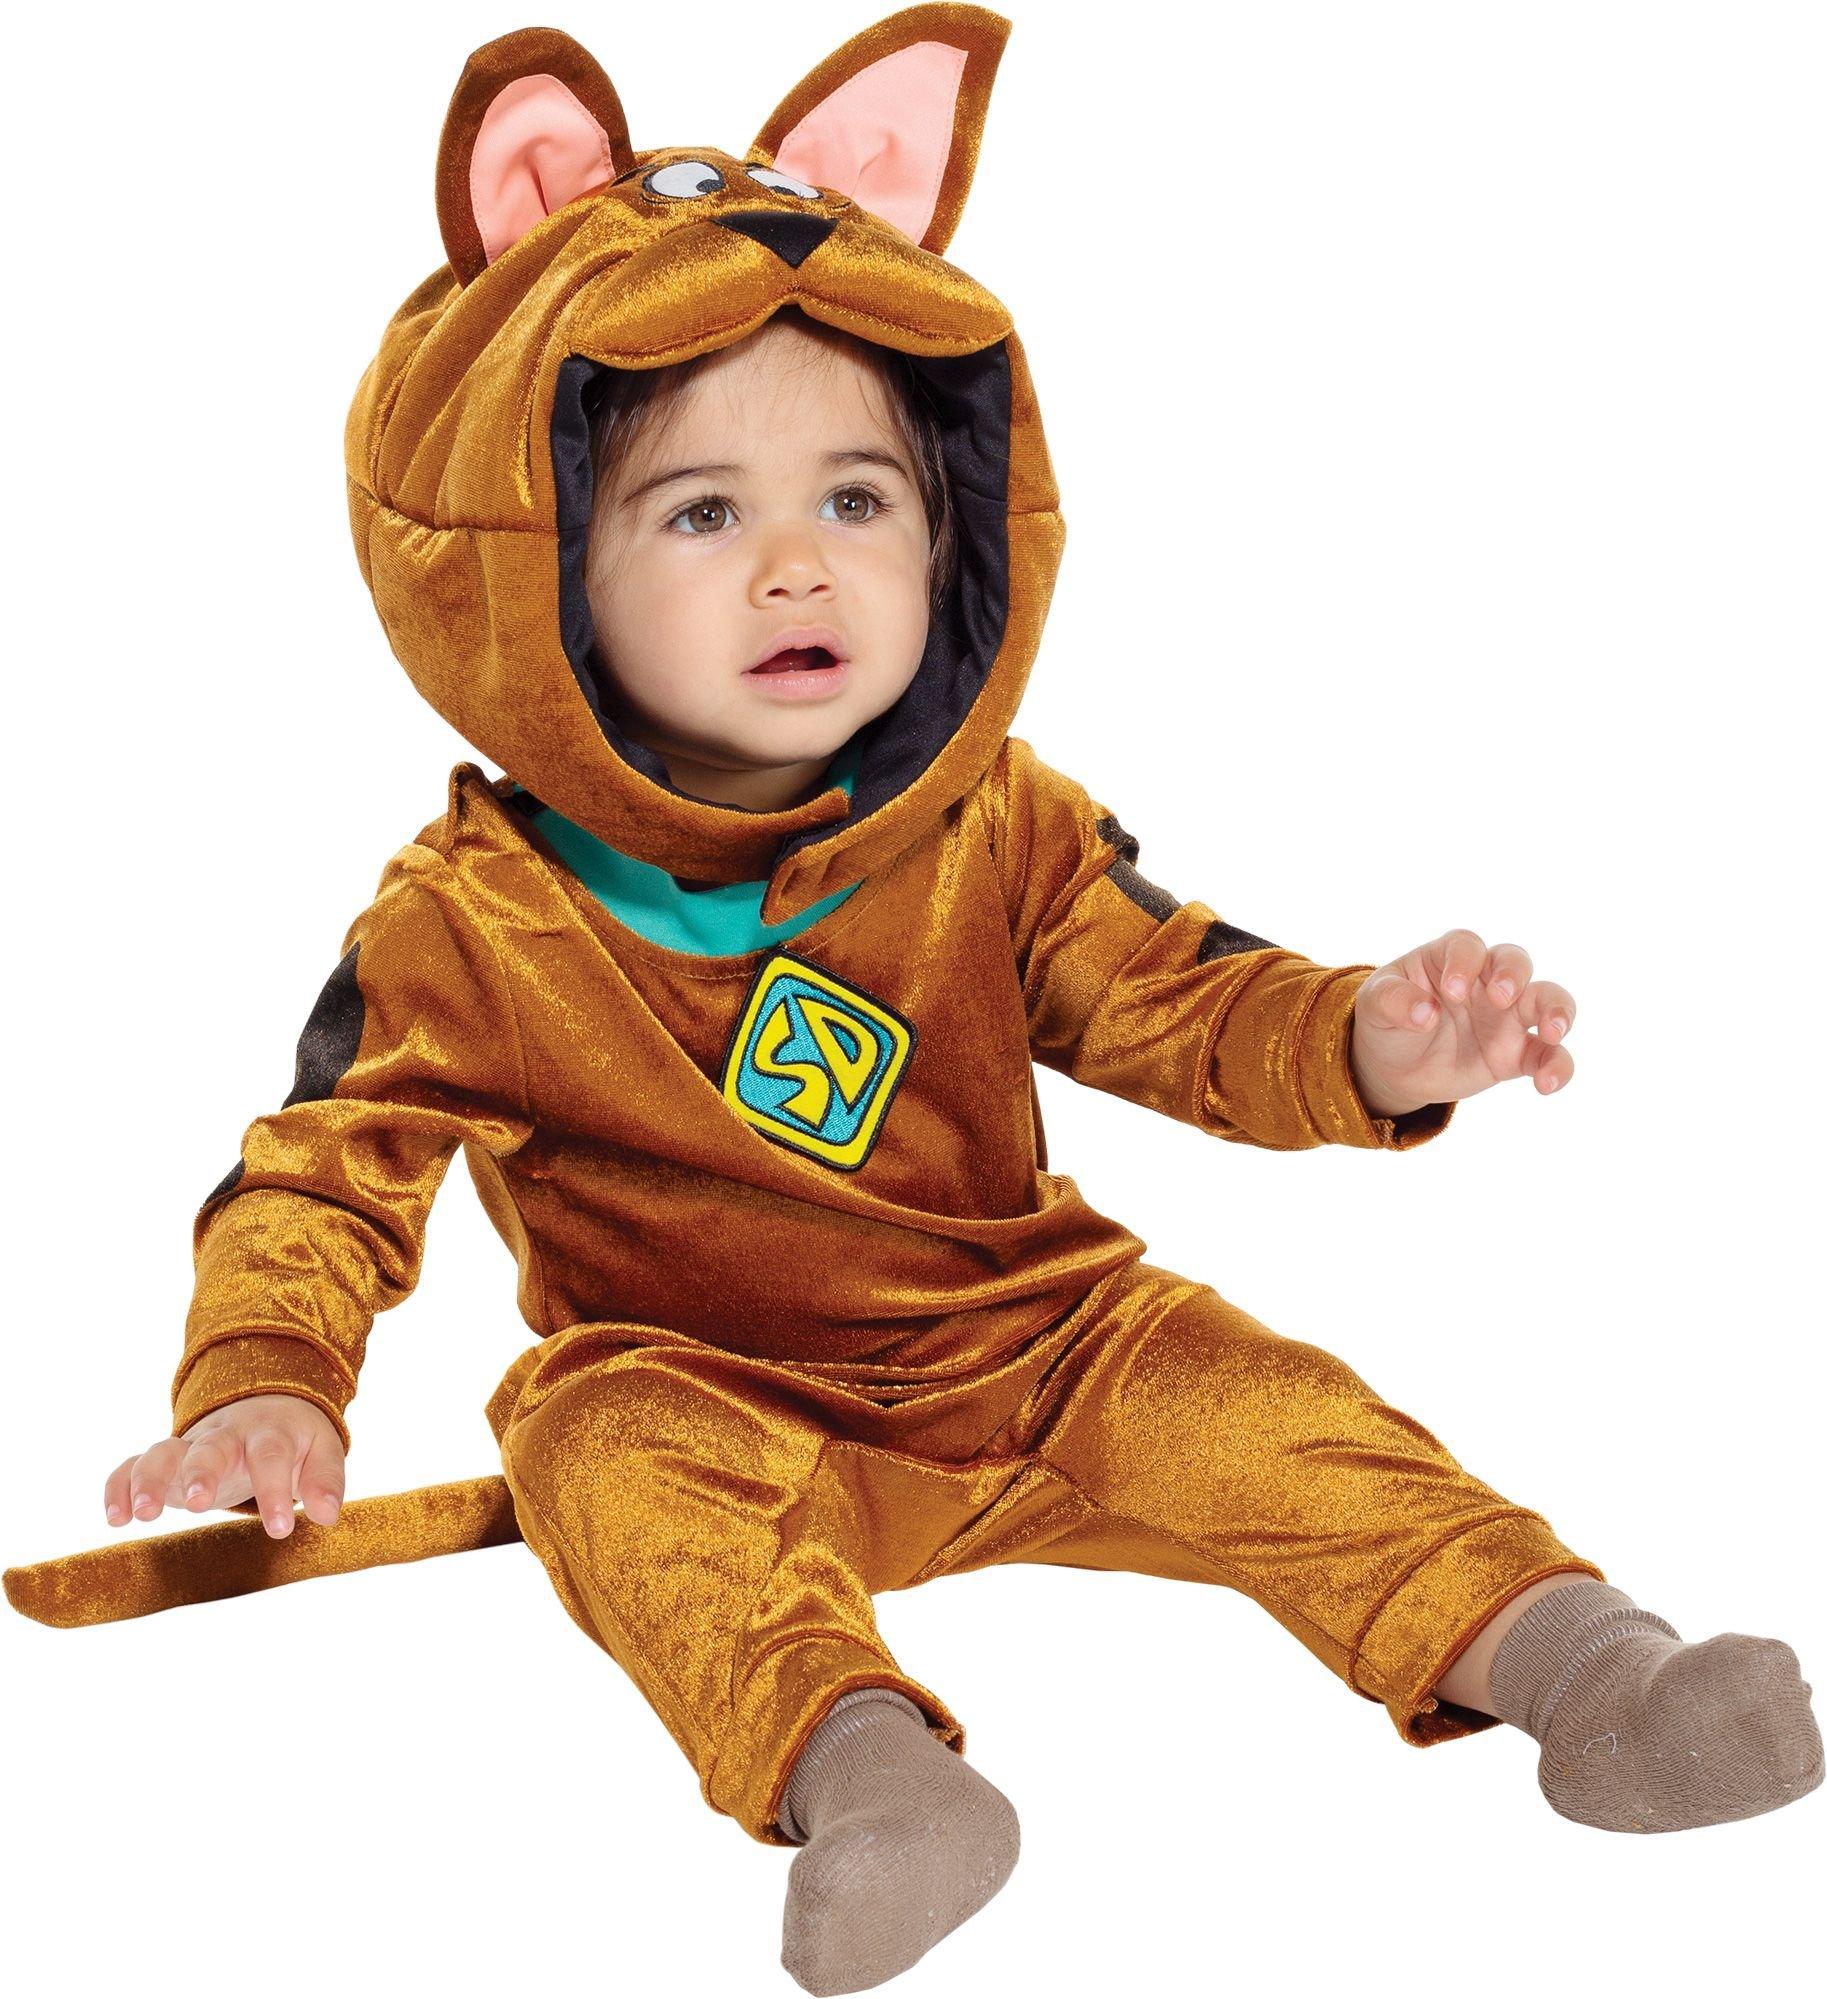 Scrappy Doo Costume Outlet, Save 66% | jlcatj.gob.mx